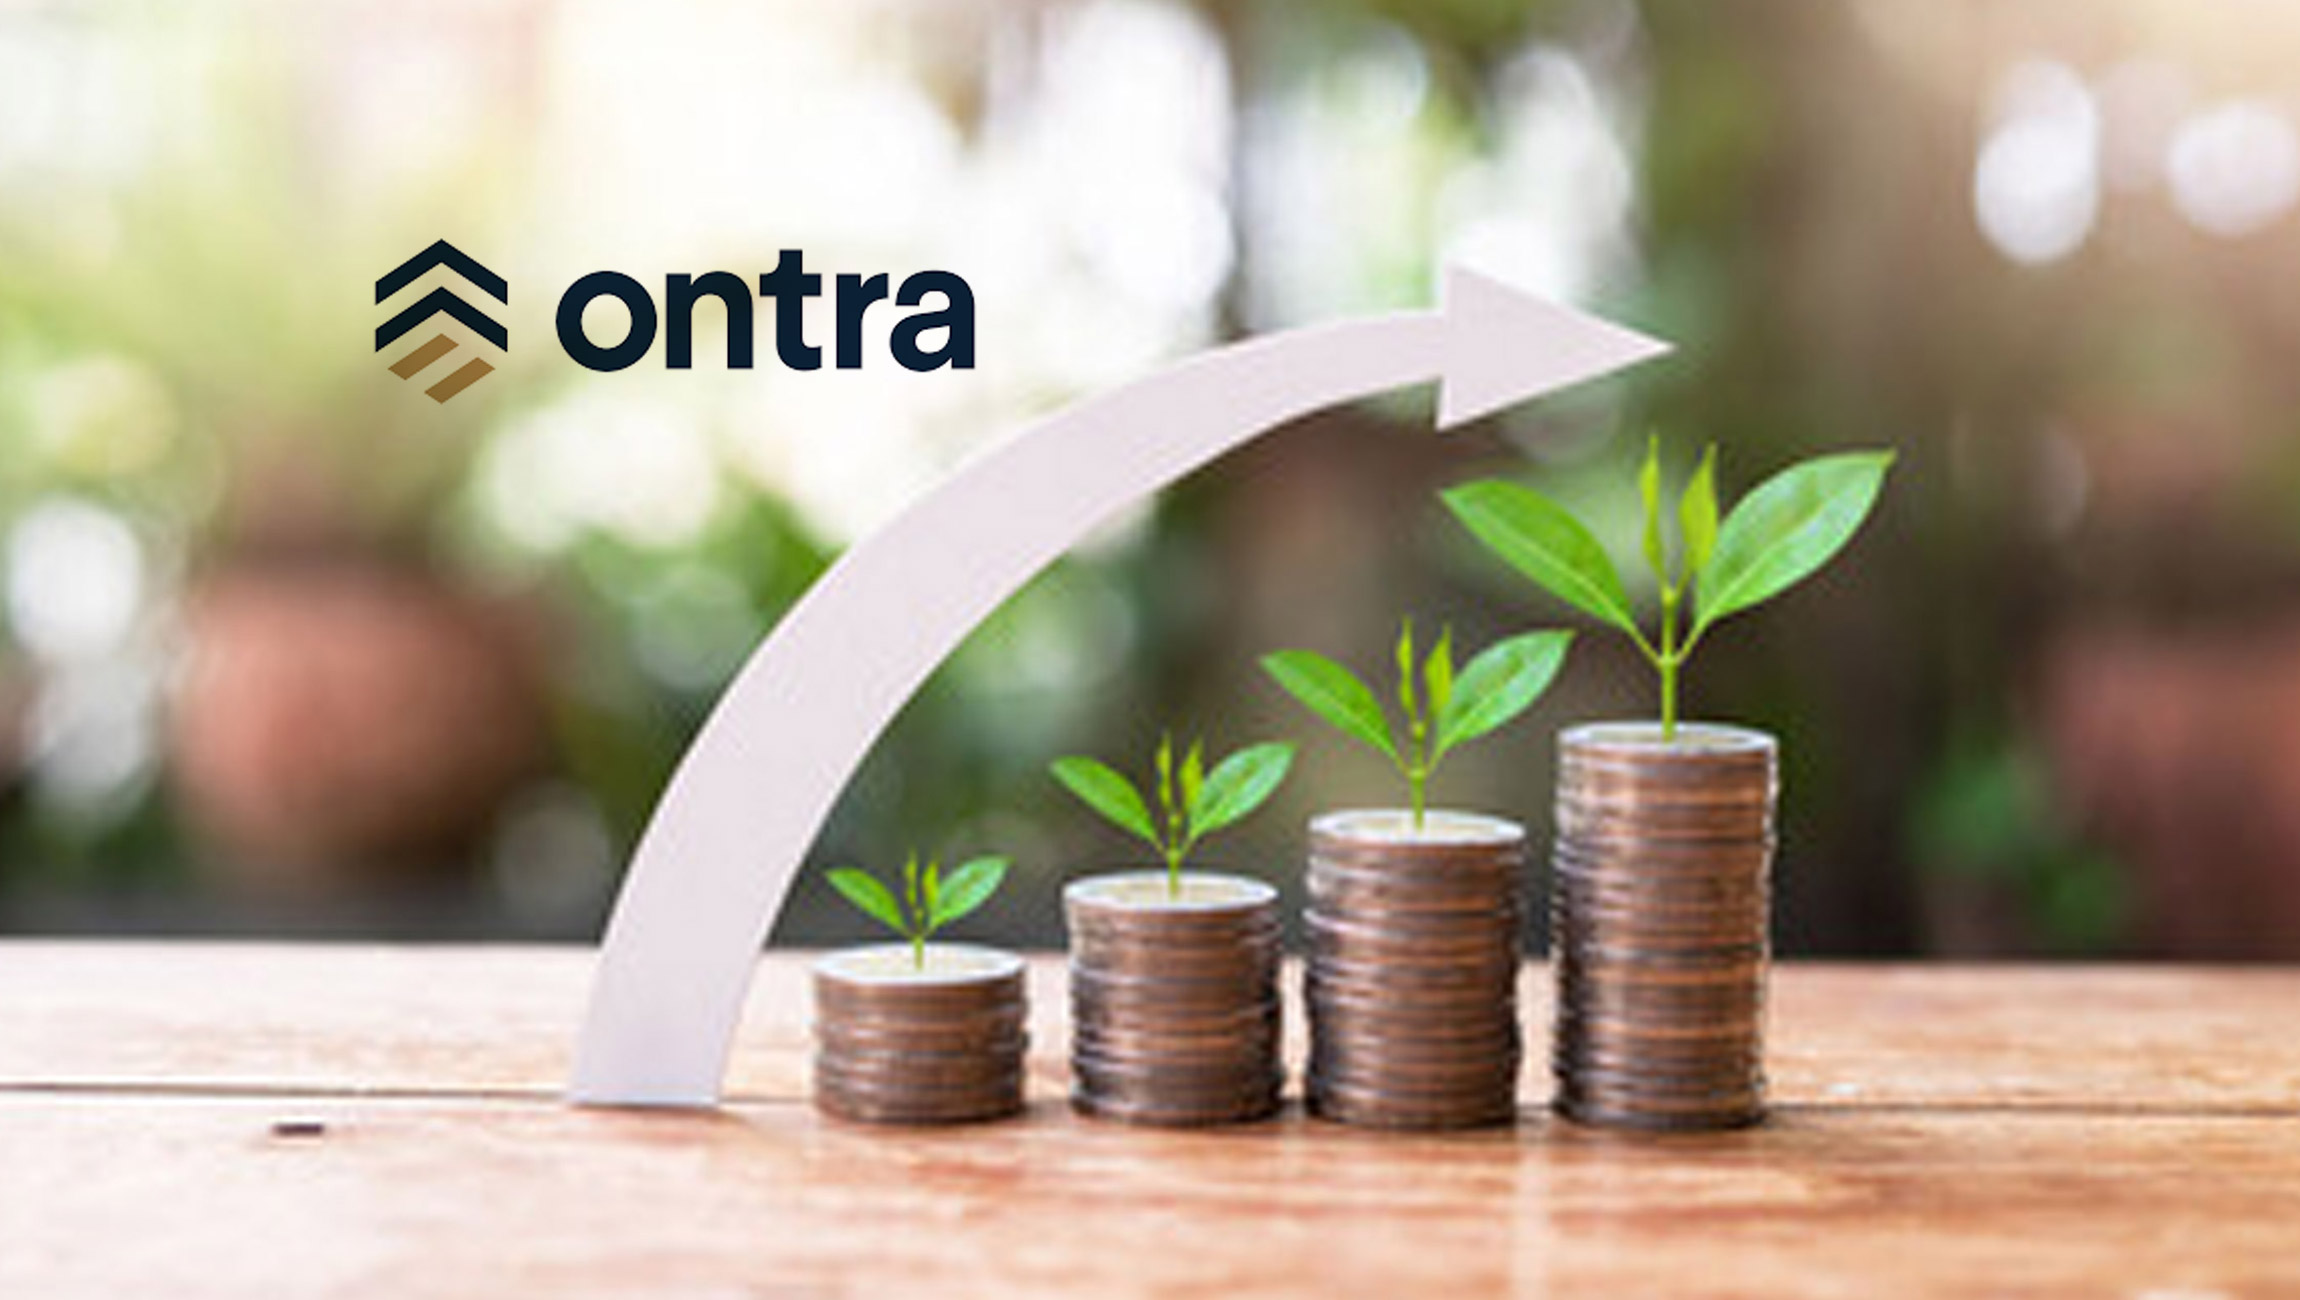 Ontra Announces 91% Revenue Growth in 2021, Extending Its Lead in AI-driven Contract Automation and Intelligence